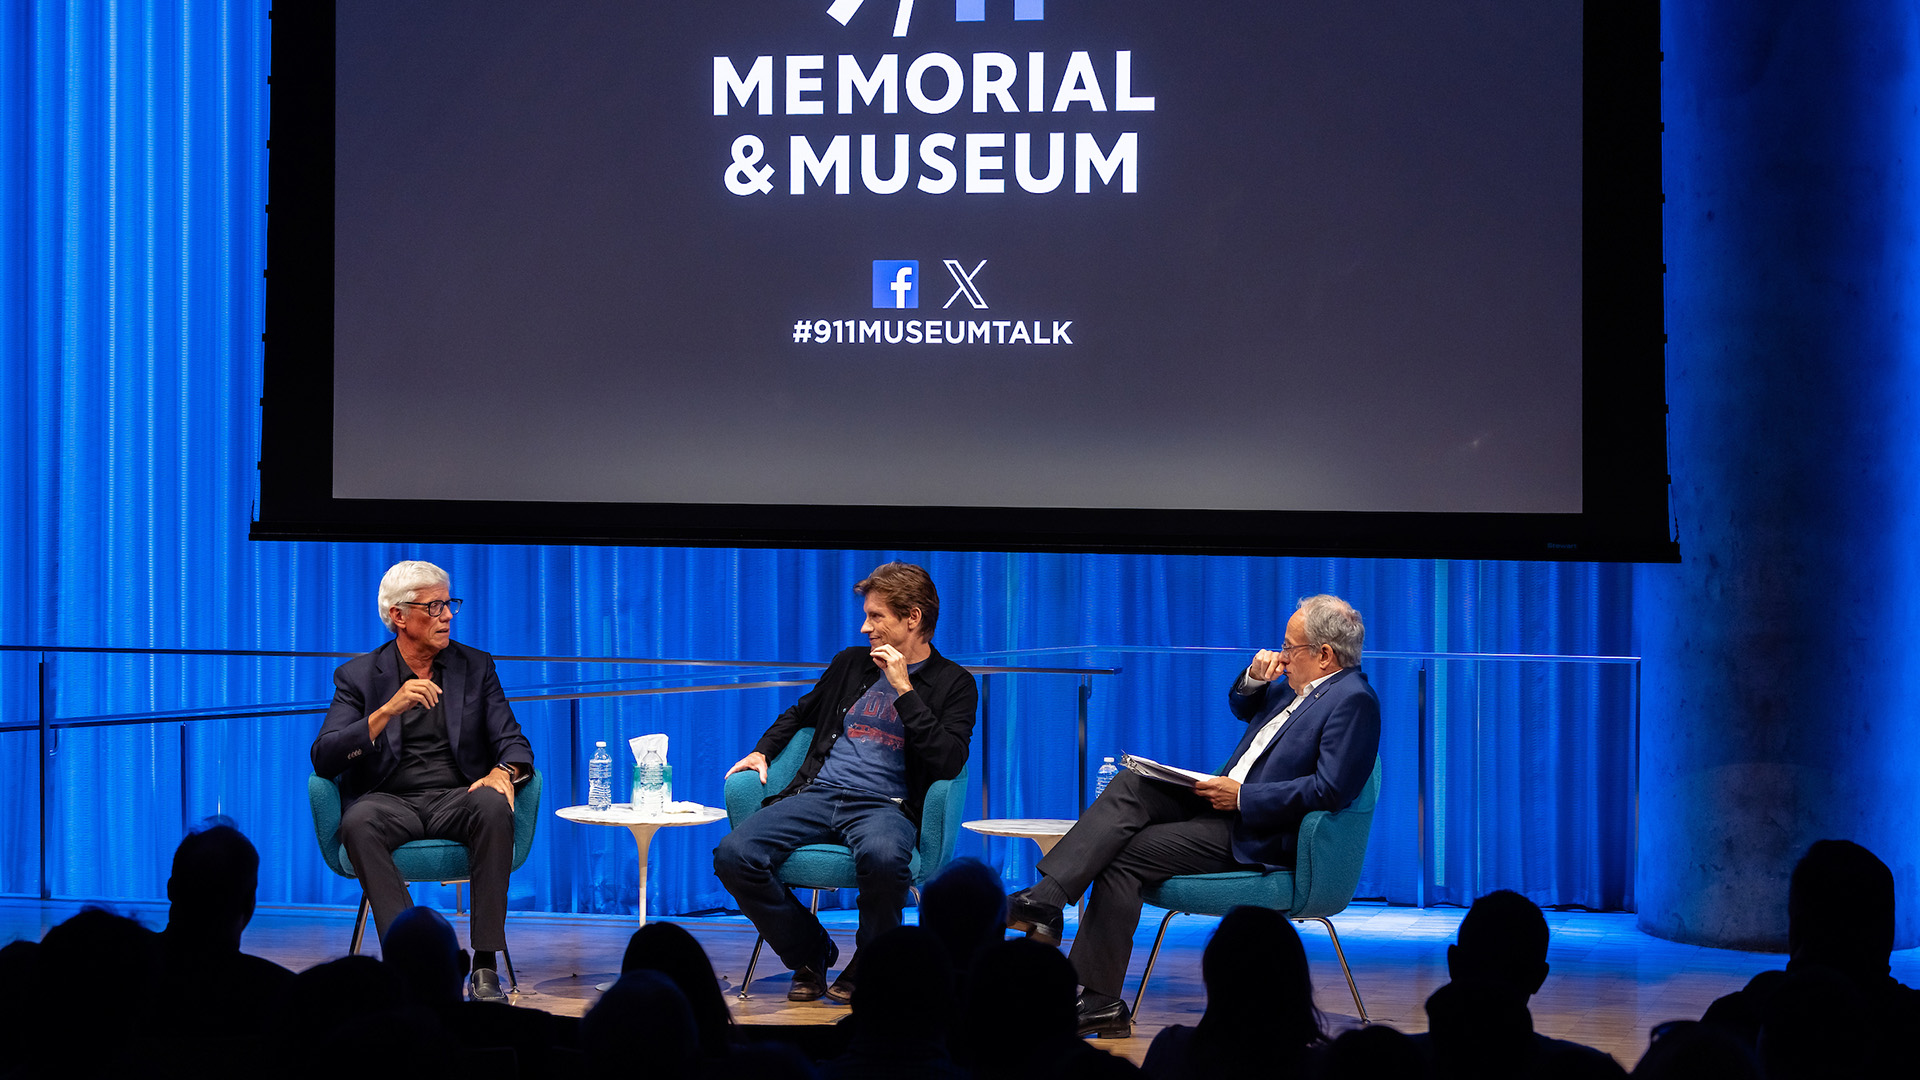 Peter Tolan (left) sitting on stage with Denis Leary (center) and Museum Director Clifford Chanin (right)